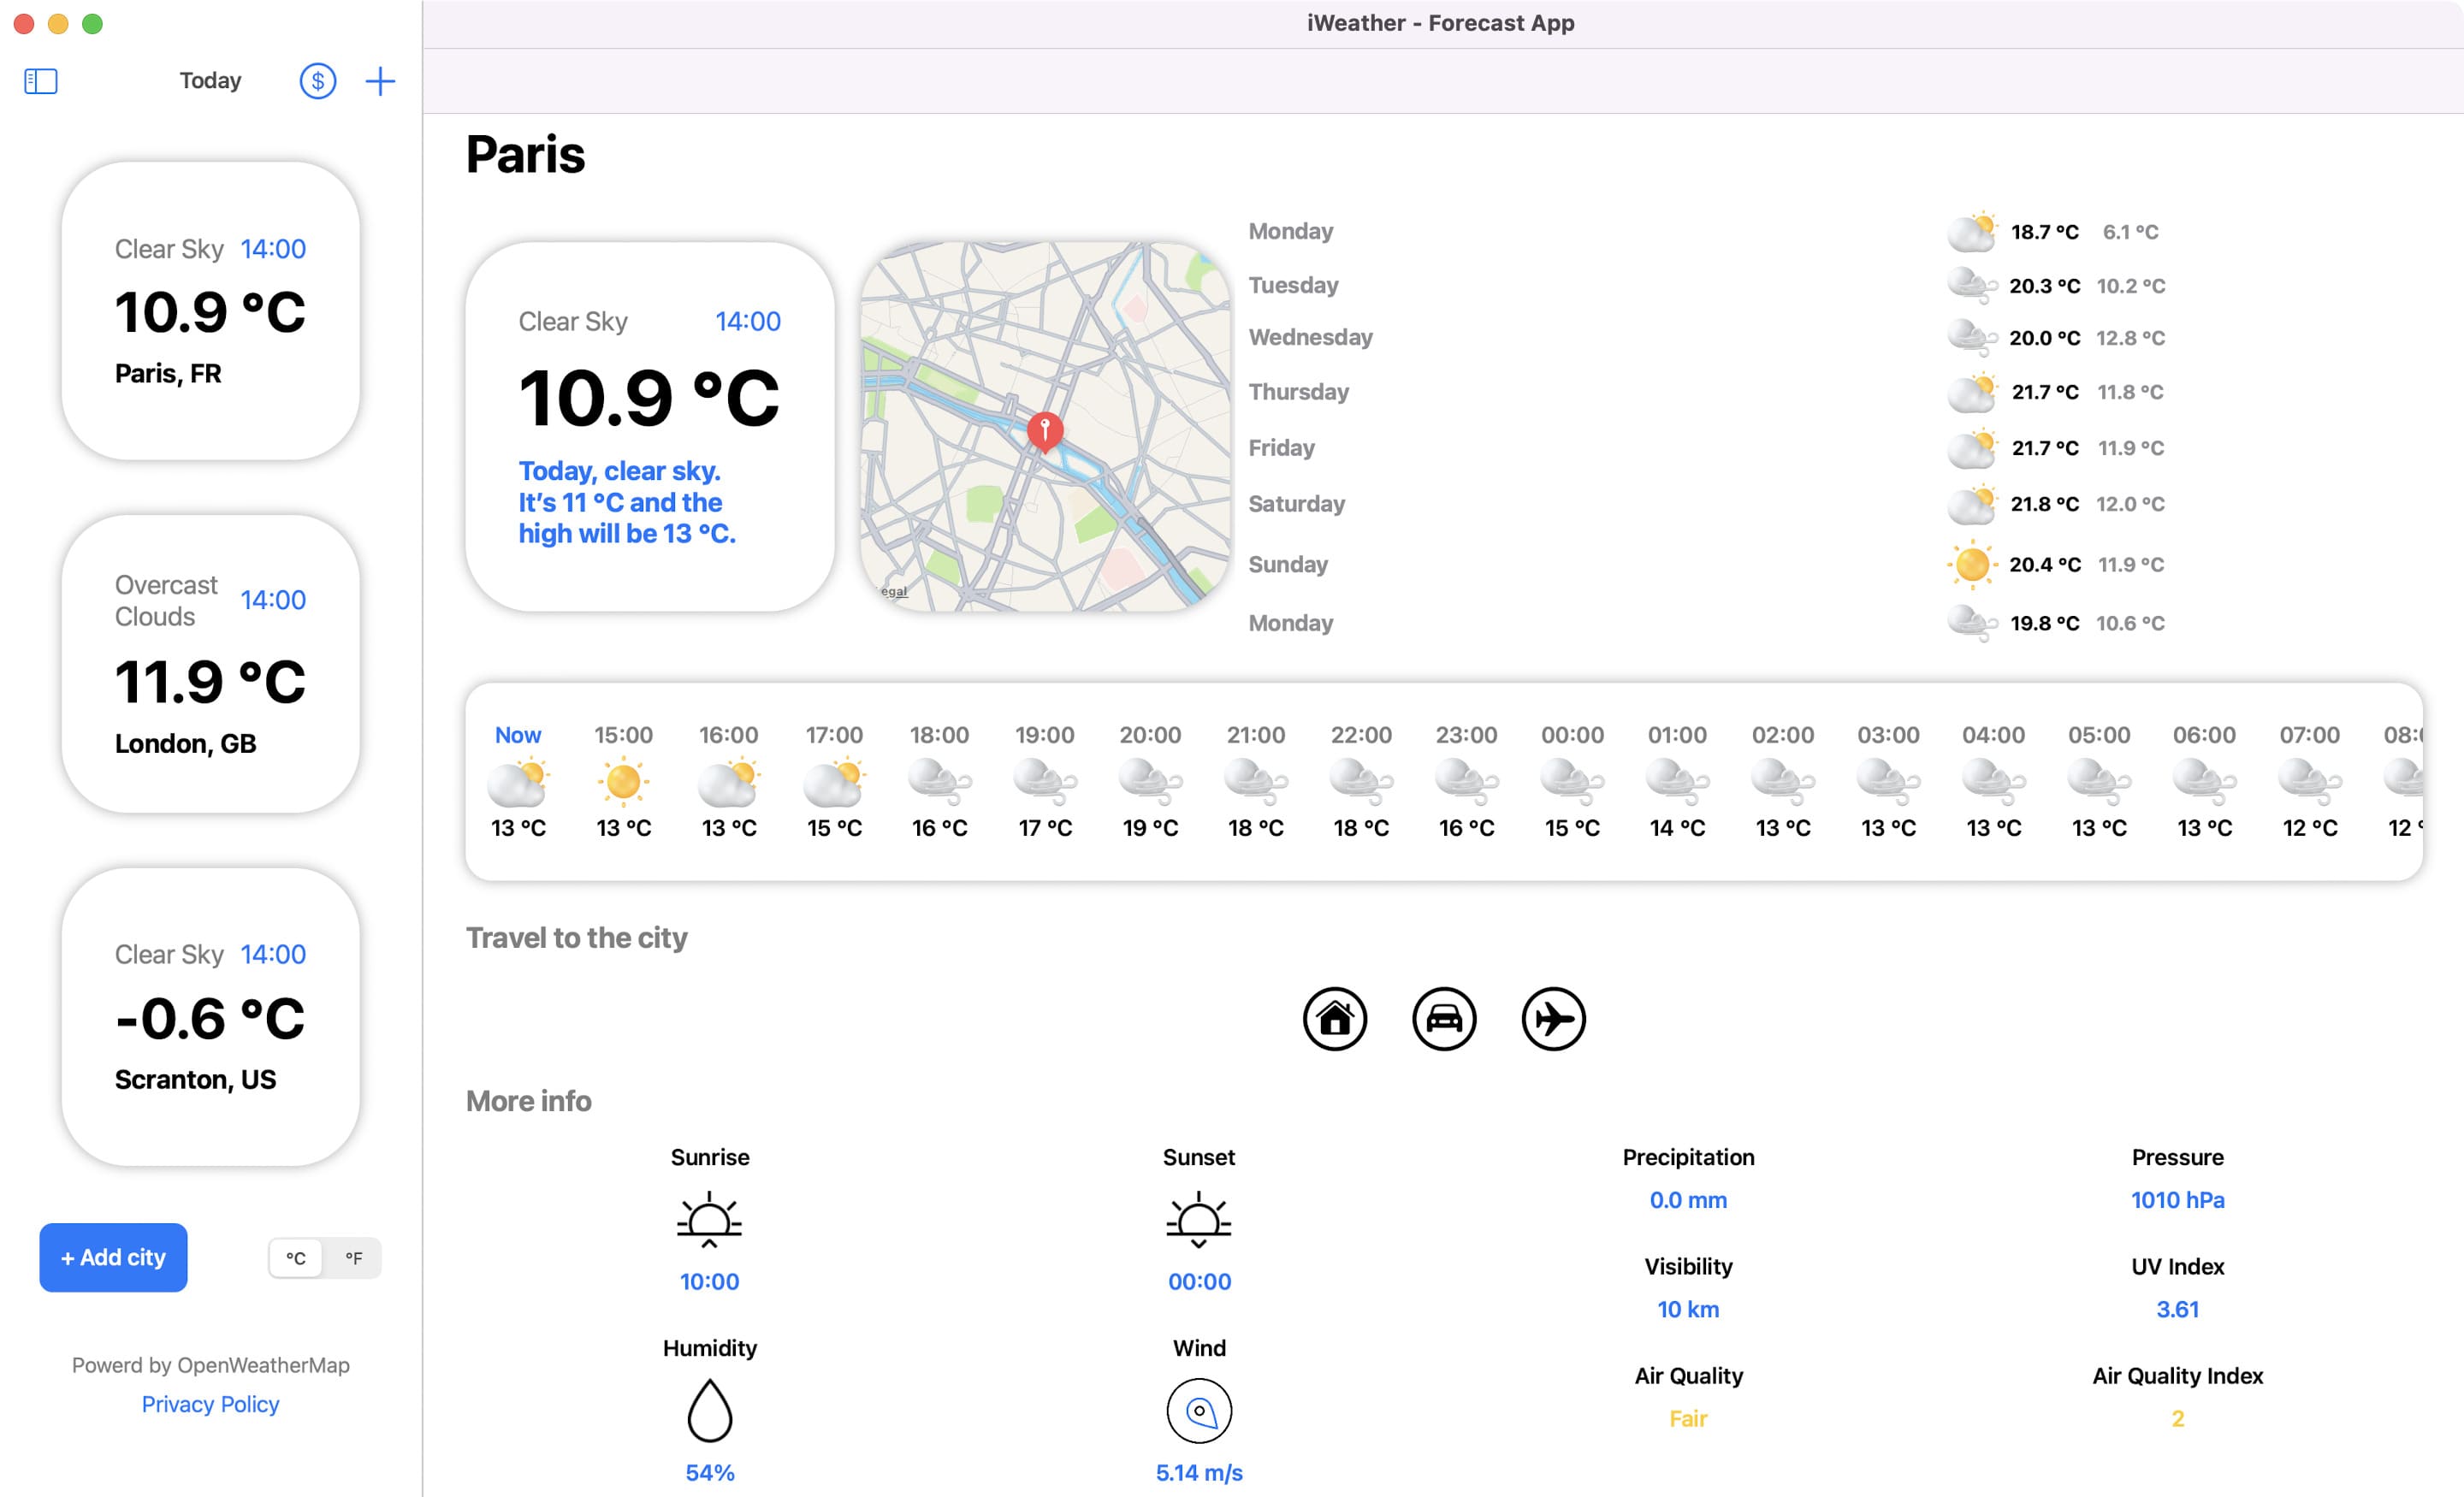 iWeather - Weather forecast app for Mac